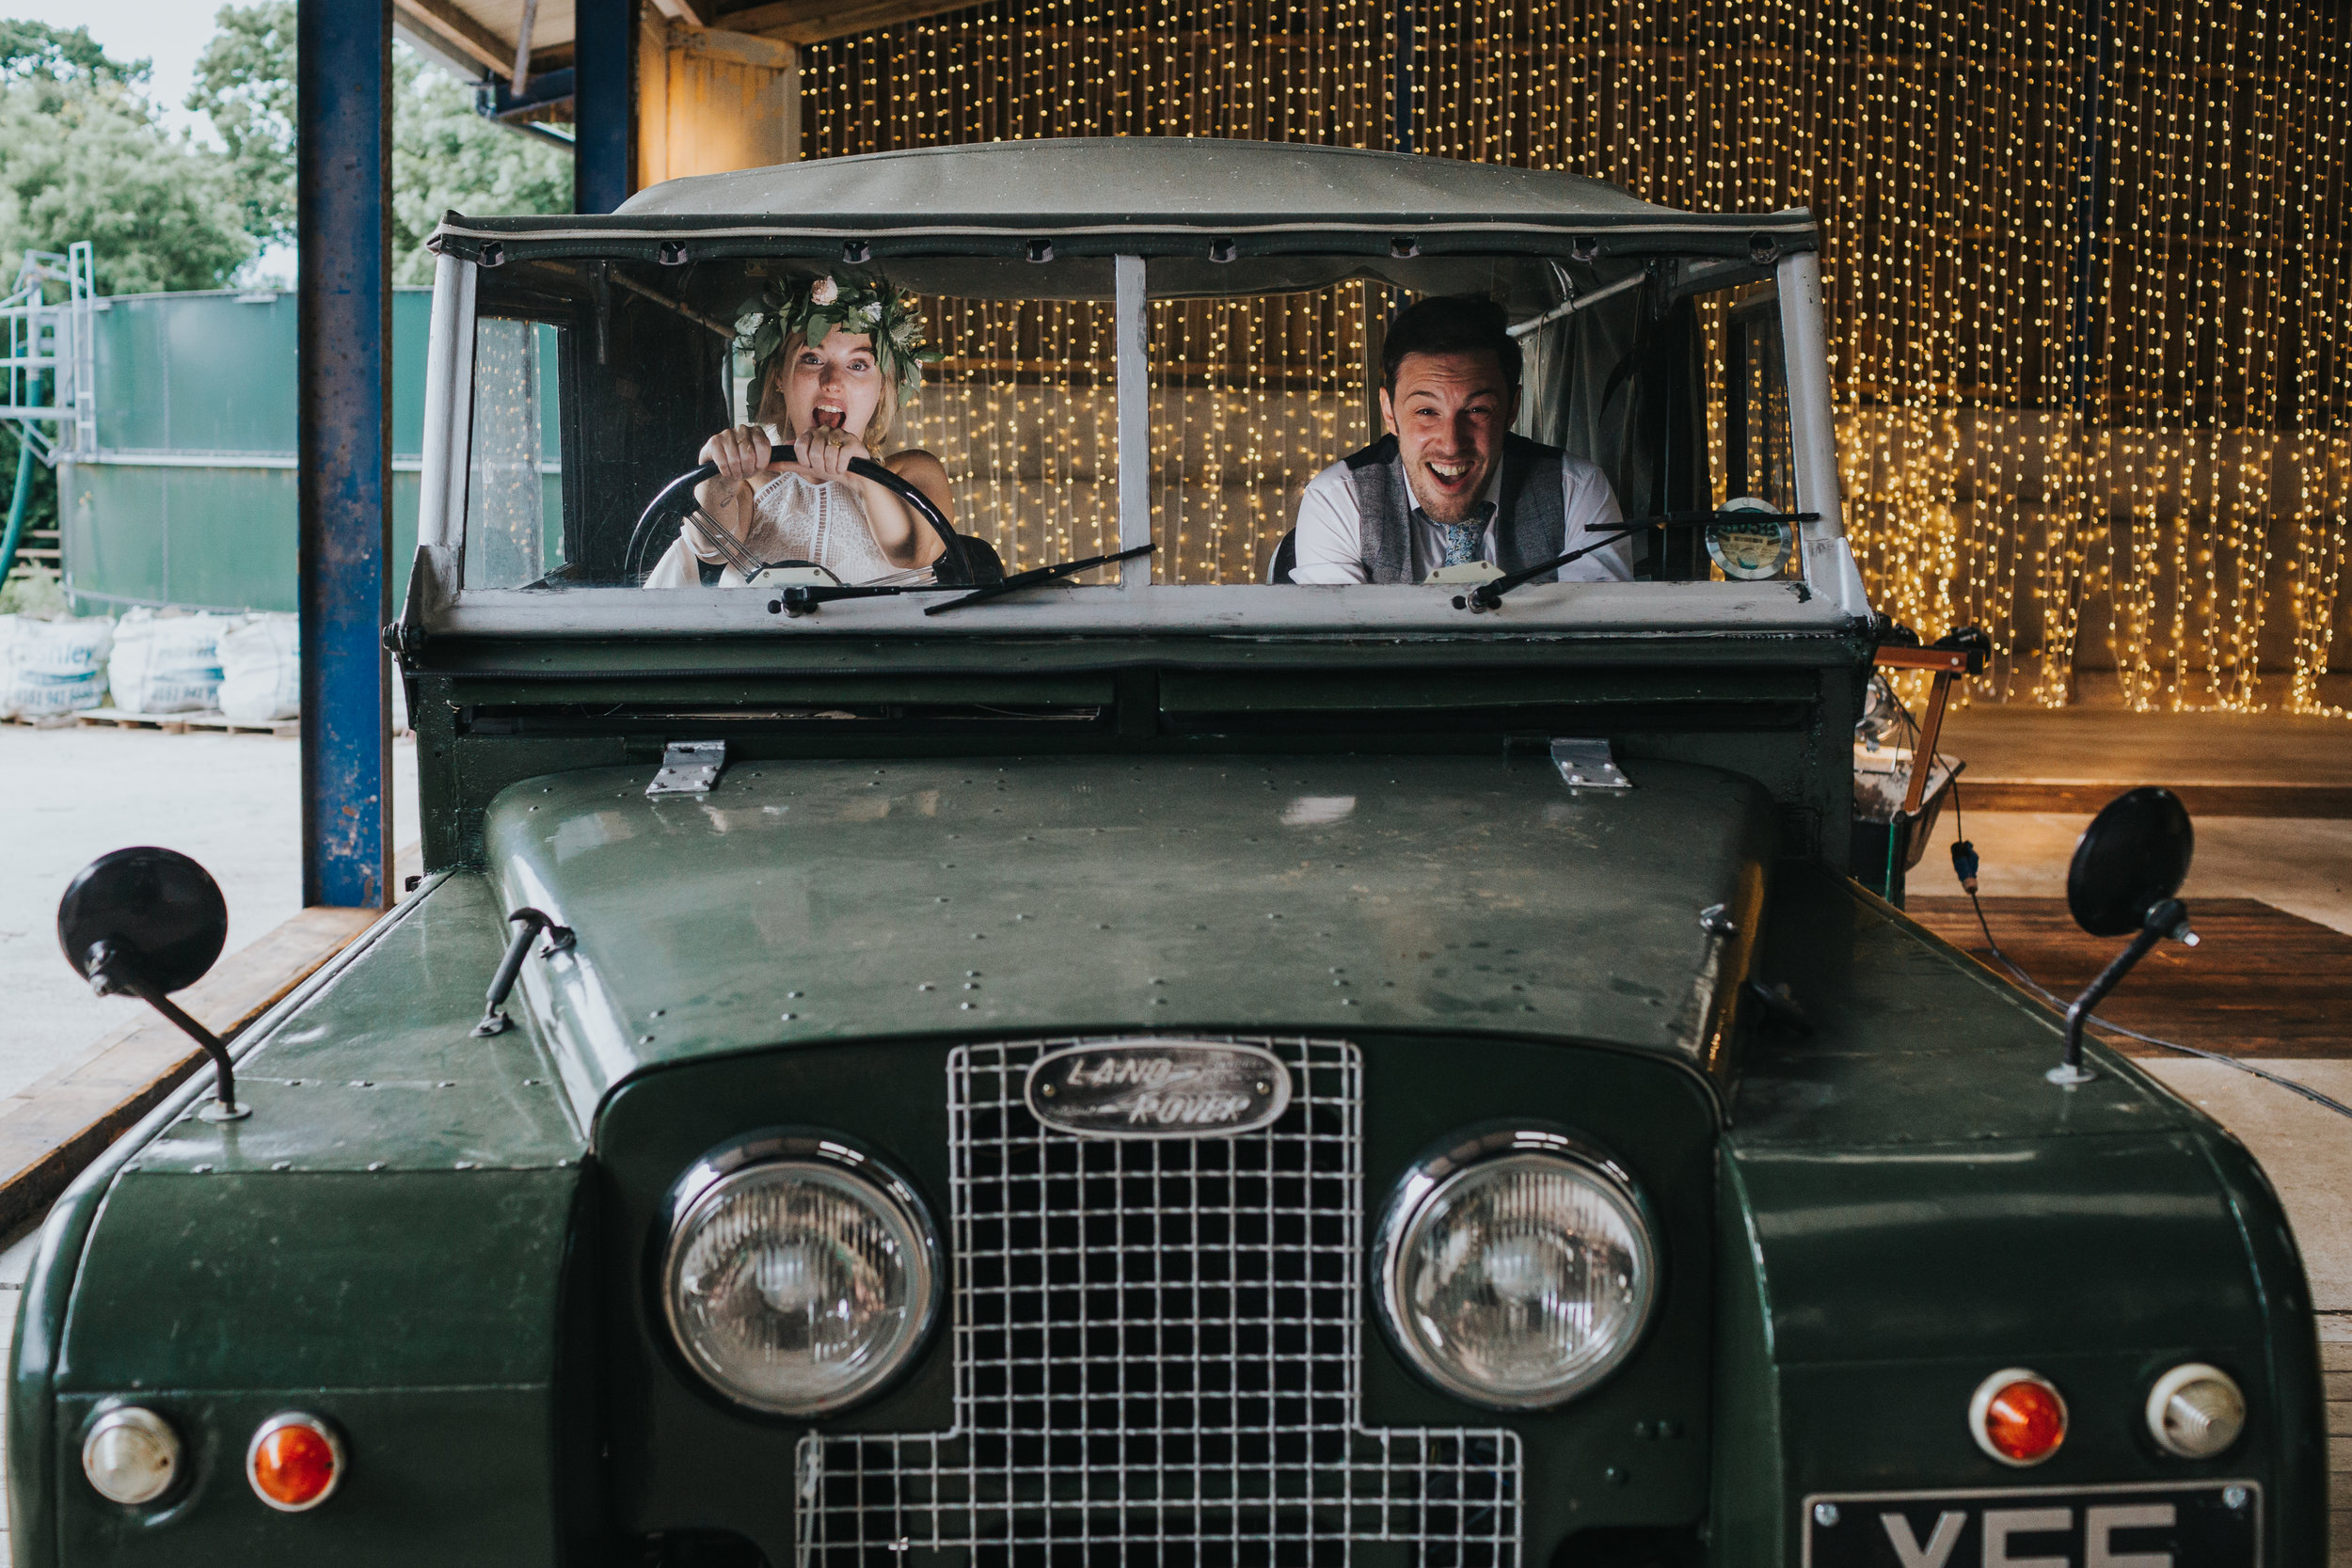 The bride and groom take the land rover for a spin. The bride is driving, but doesn't have a license. Everyone looks scared. 